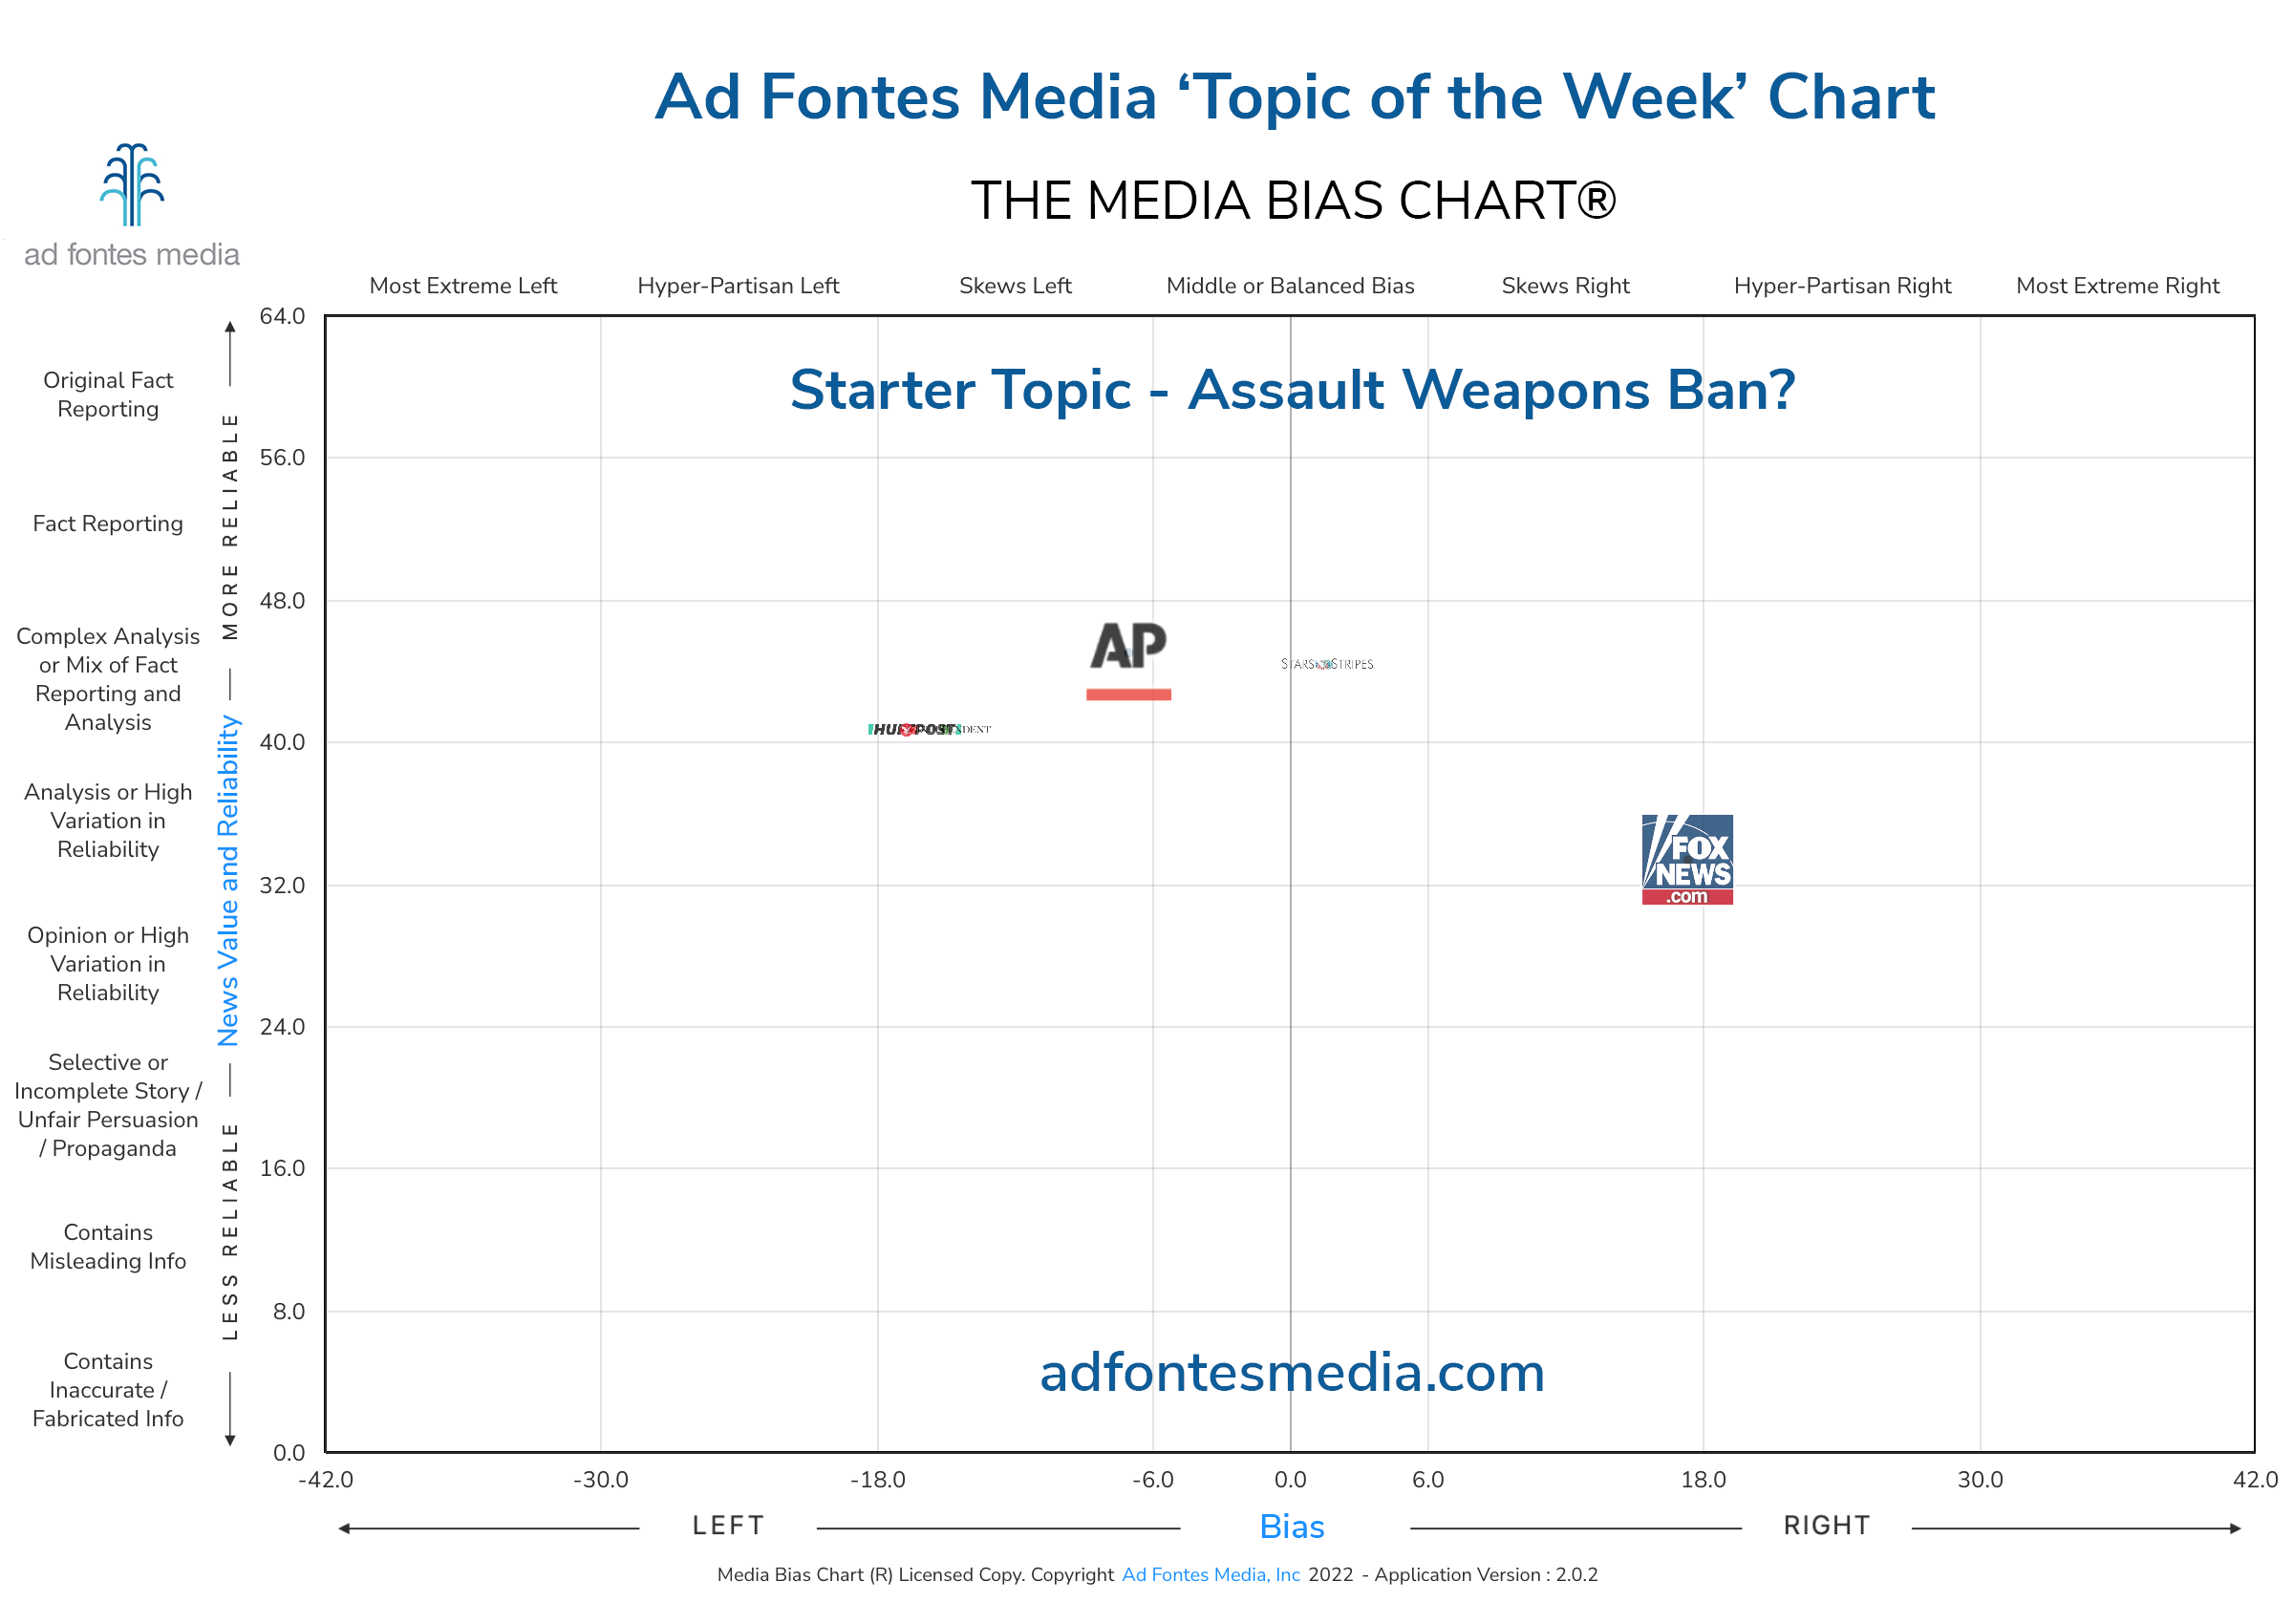 Scores of the Assault Weapons Ban? articles on the chart